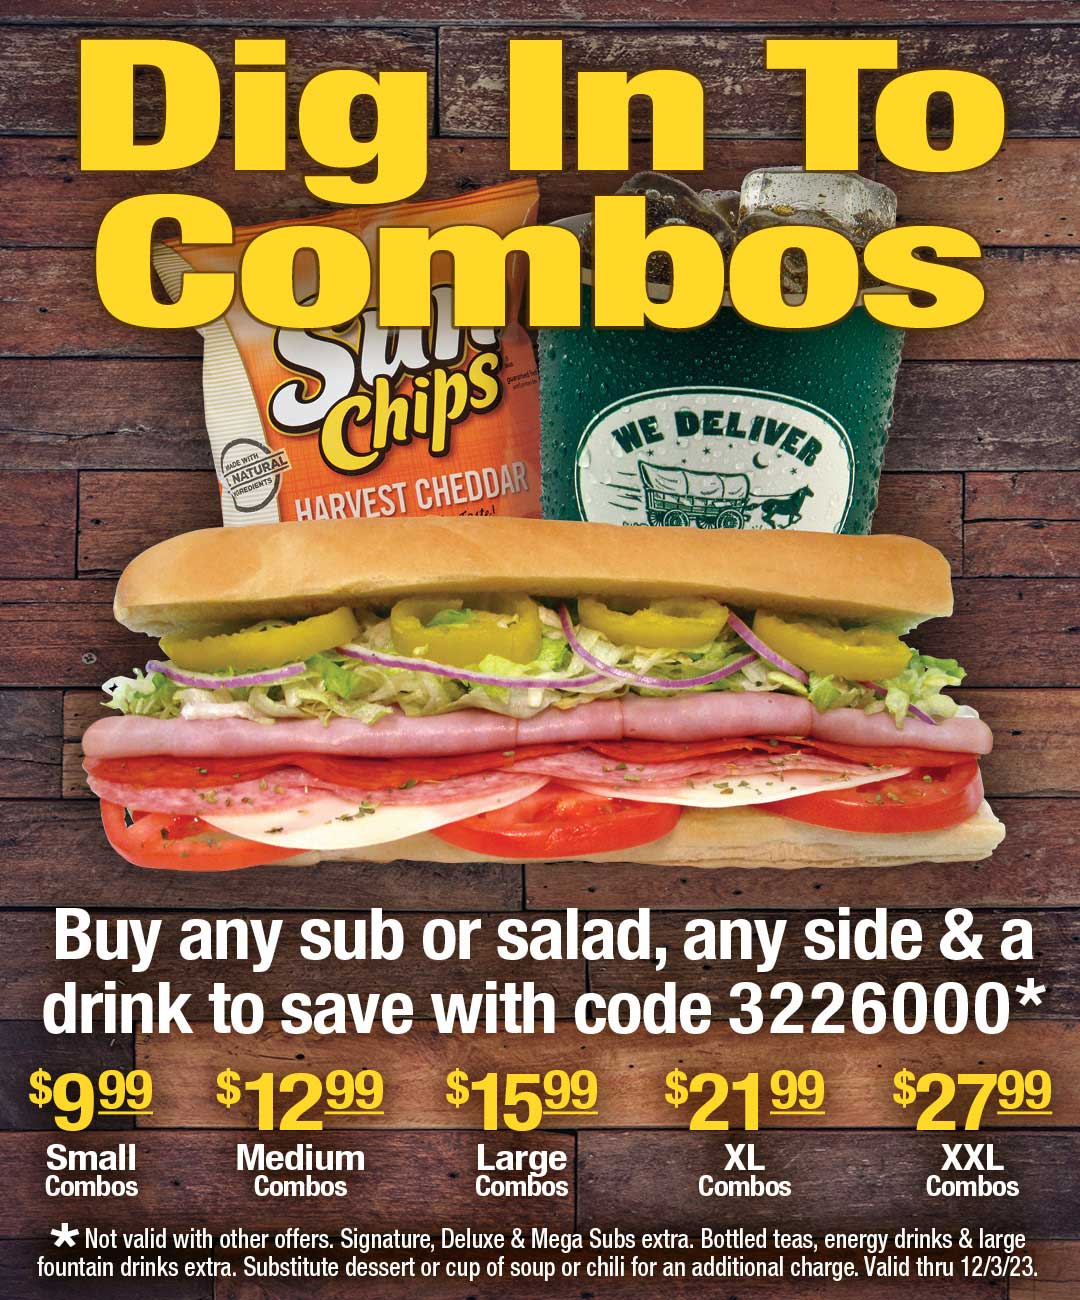 Dig in to Combos and Save